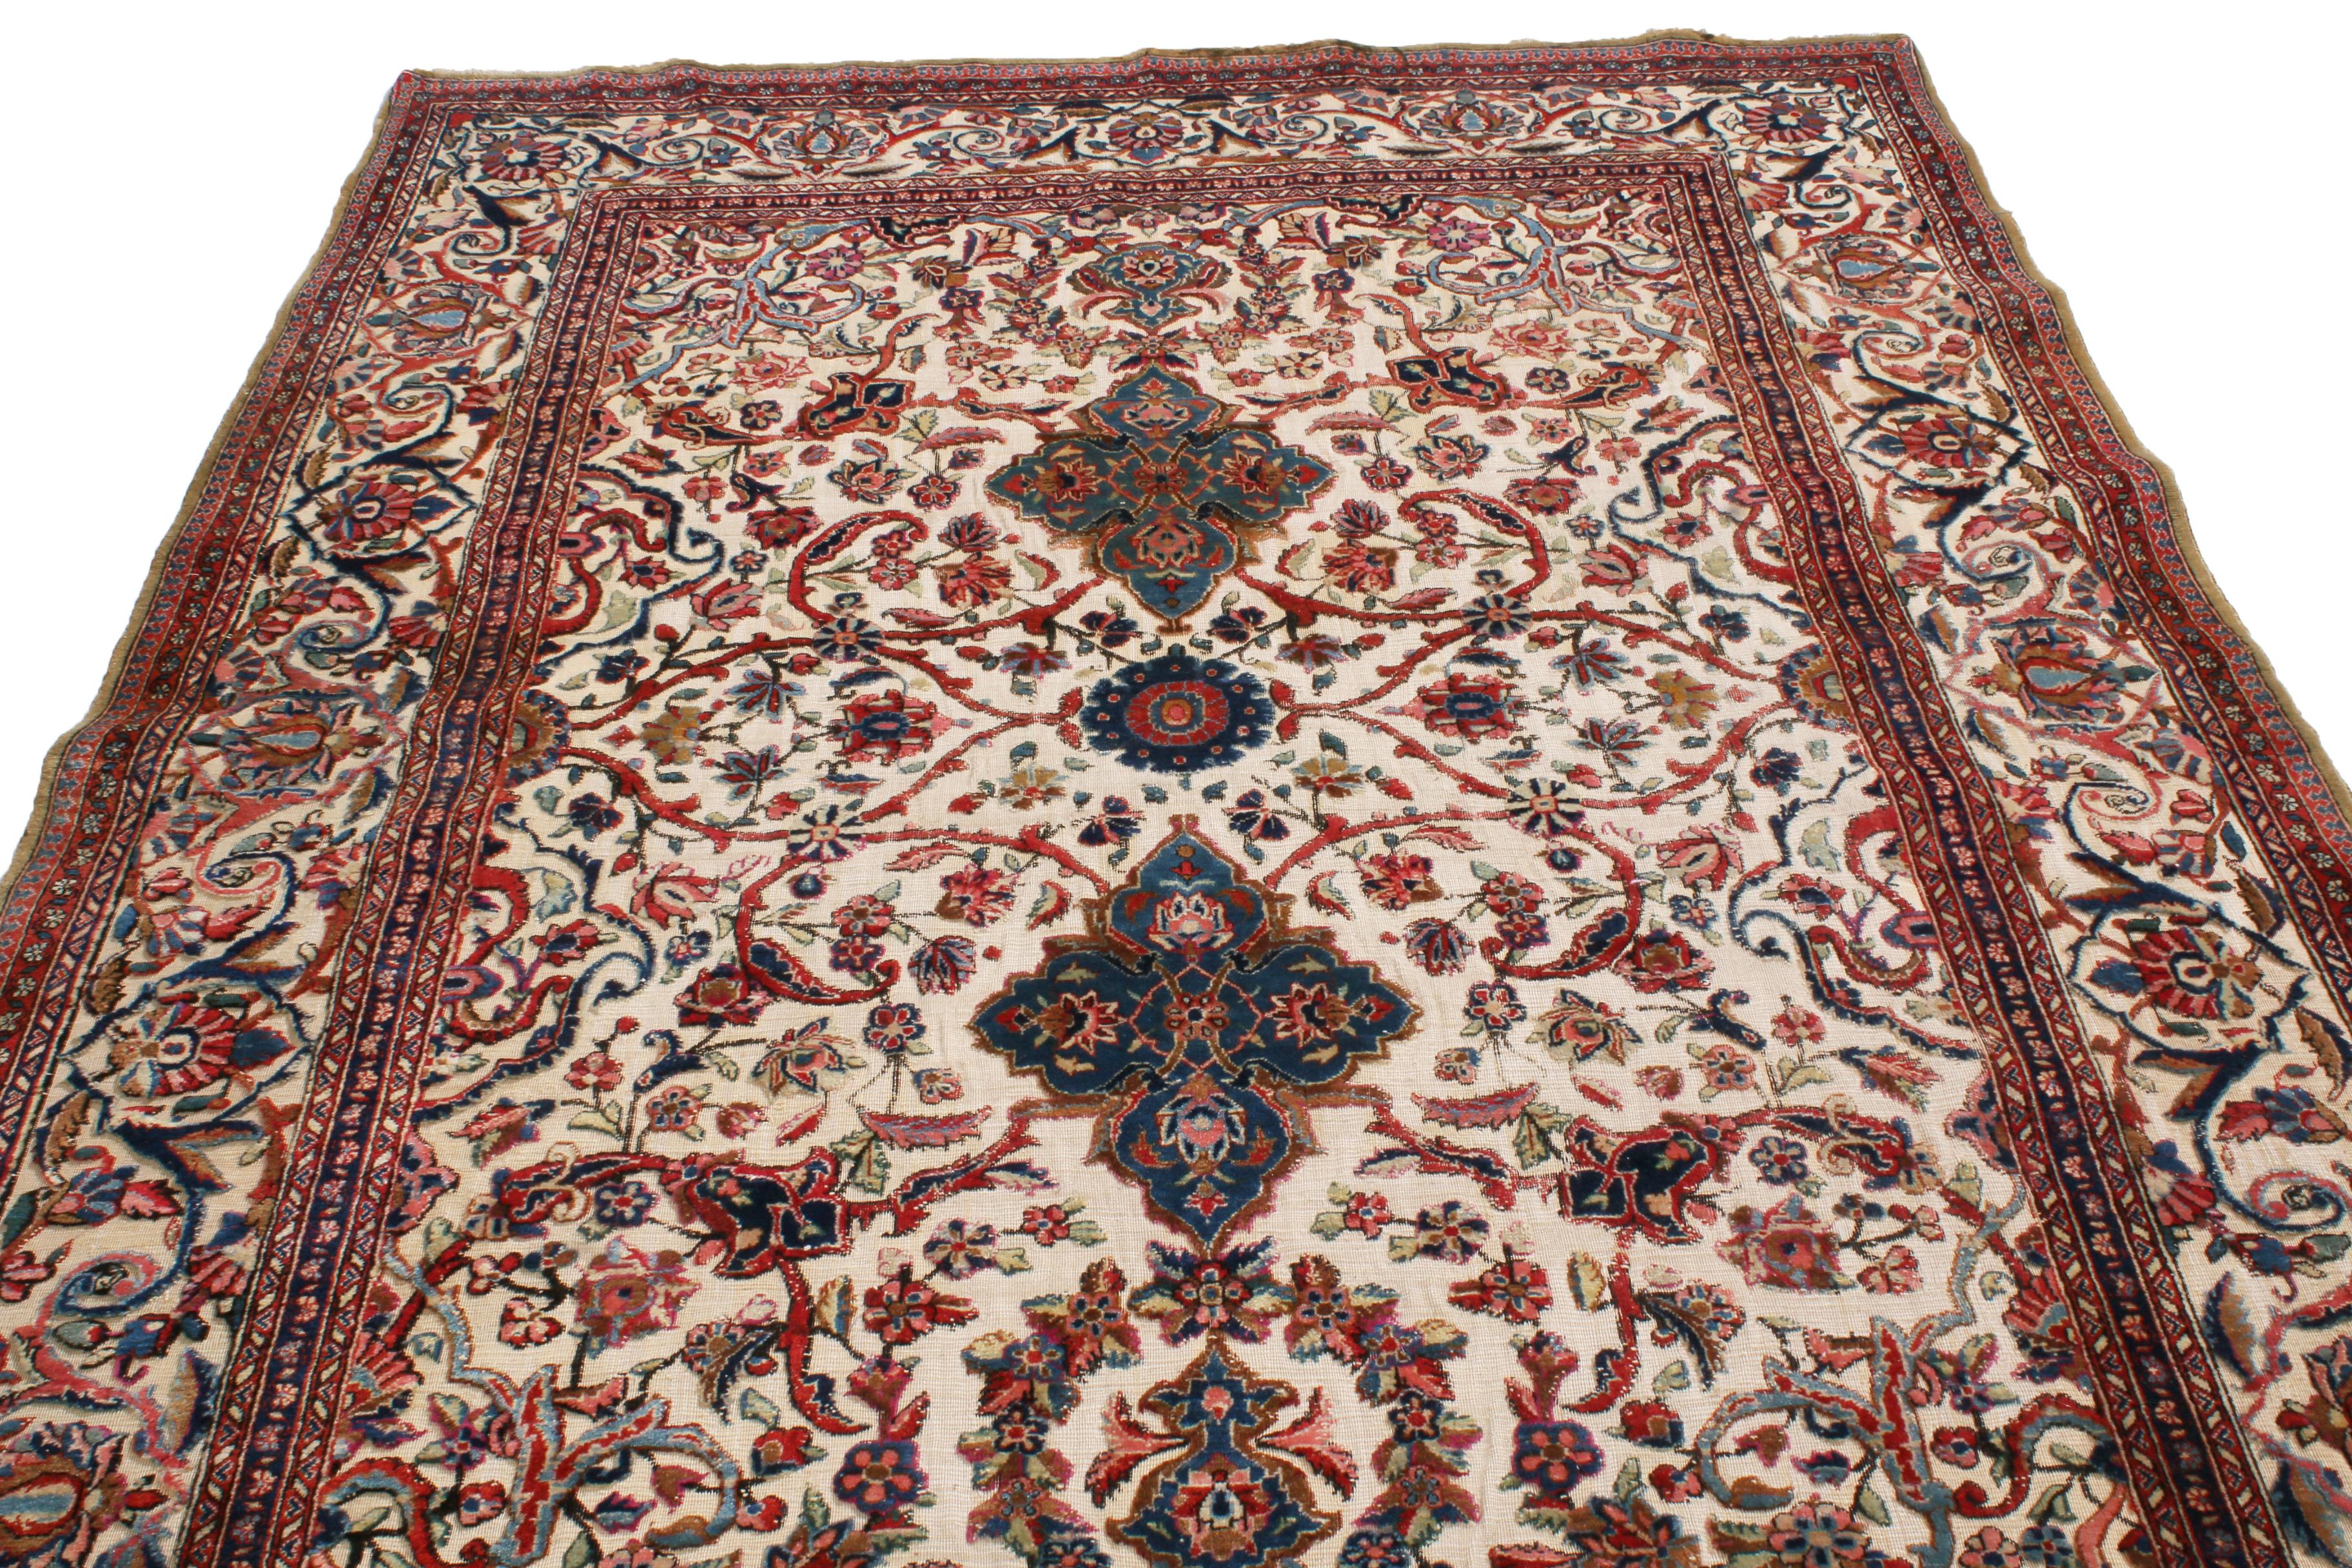 Enjoying pristine, hand knotted silk originating from Persia in 1900, this antique Kashan rug marries the intricacy of traditional lotus flowers and Islmi vine scrolls with an uncommon emphasis on the luminous beige background, accented by the